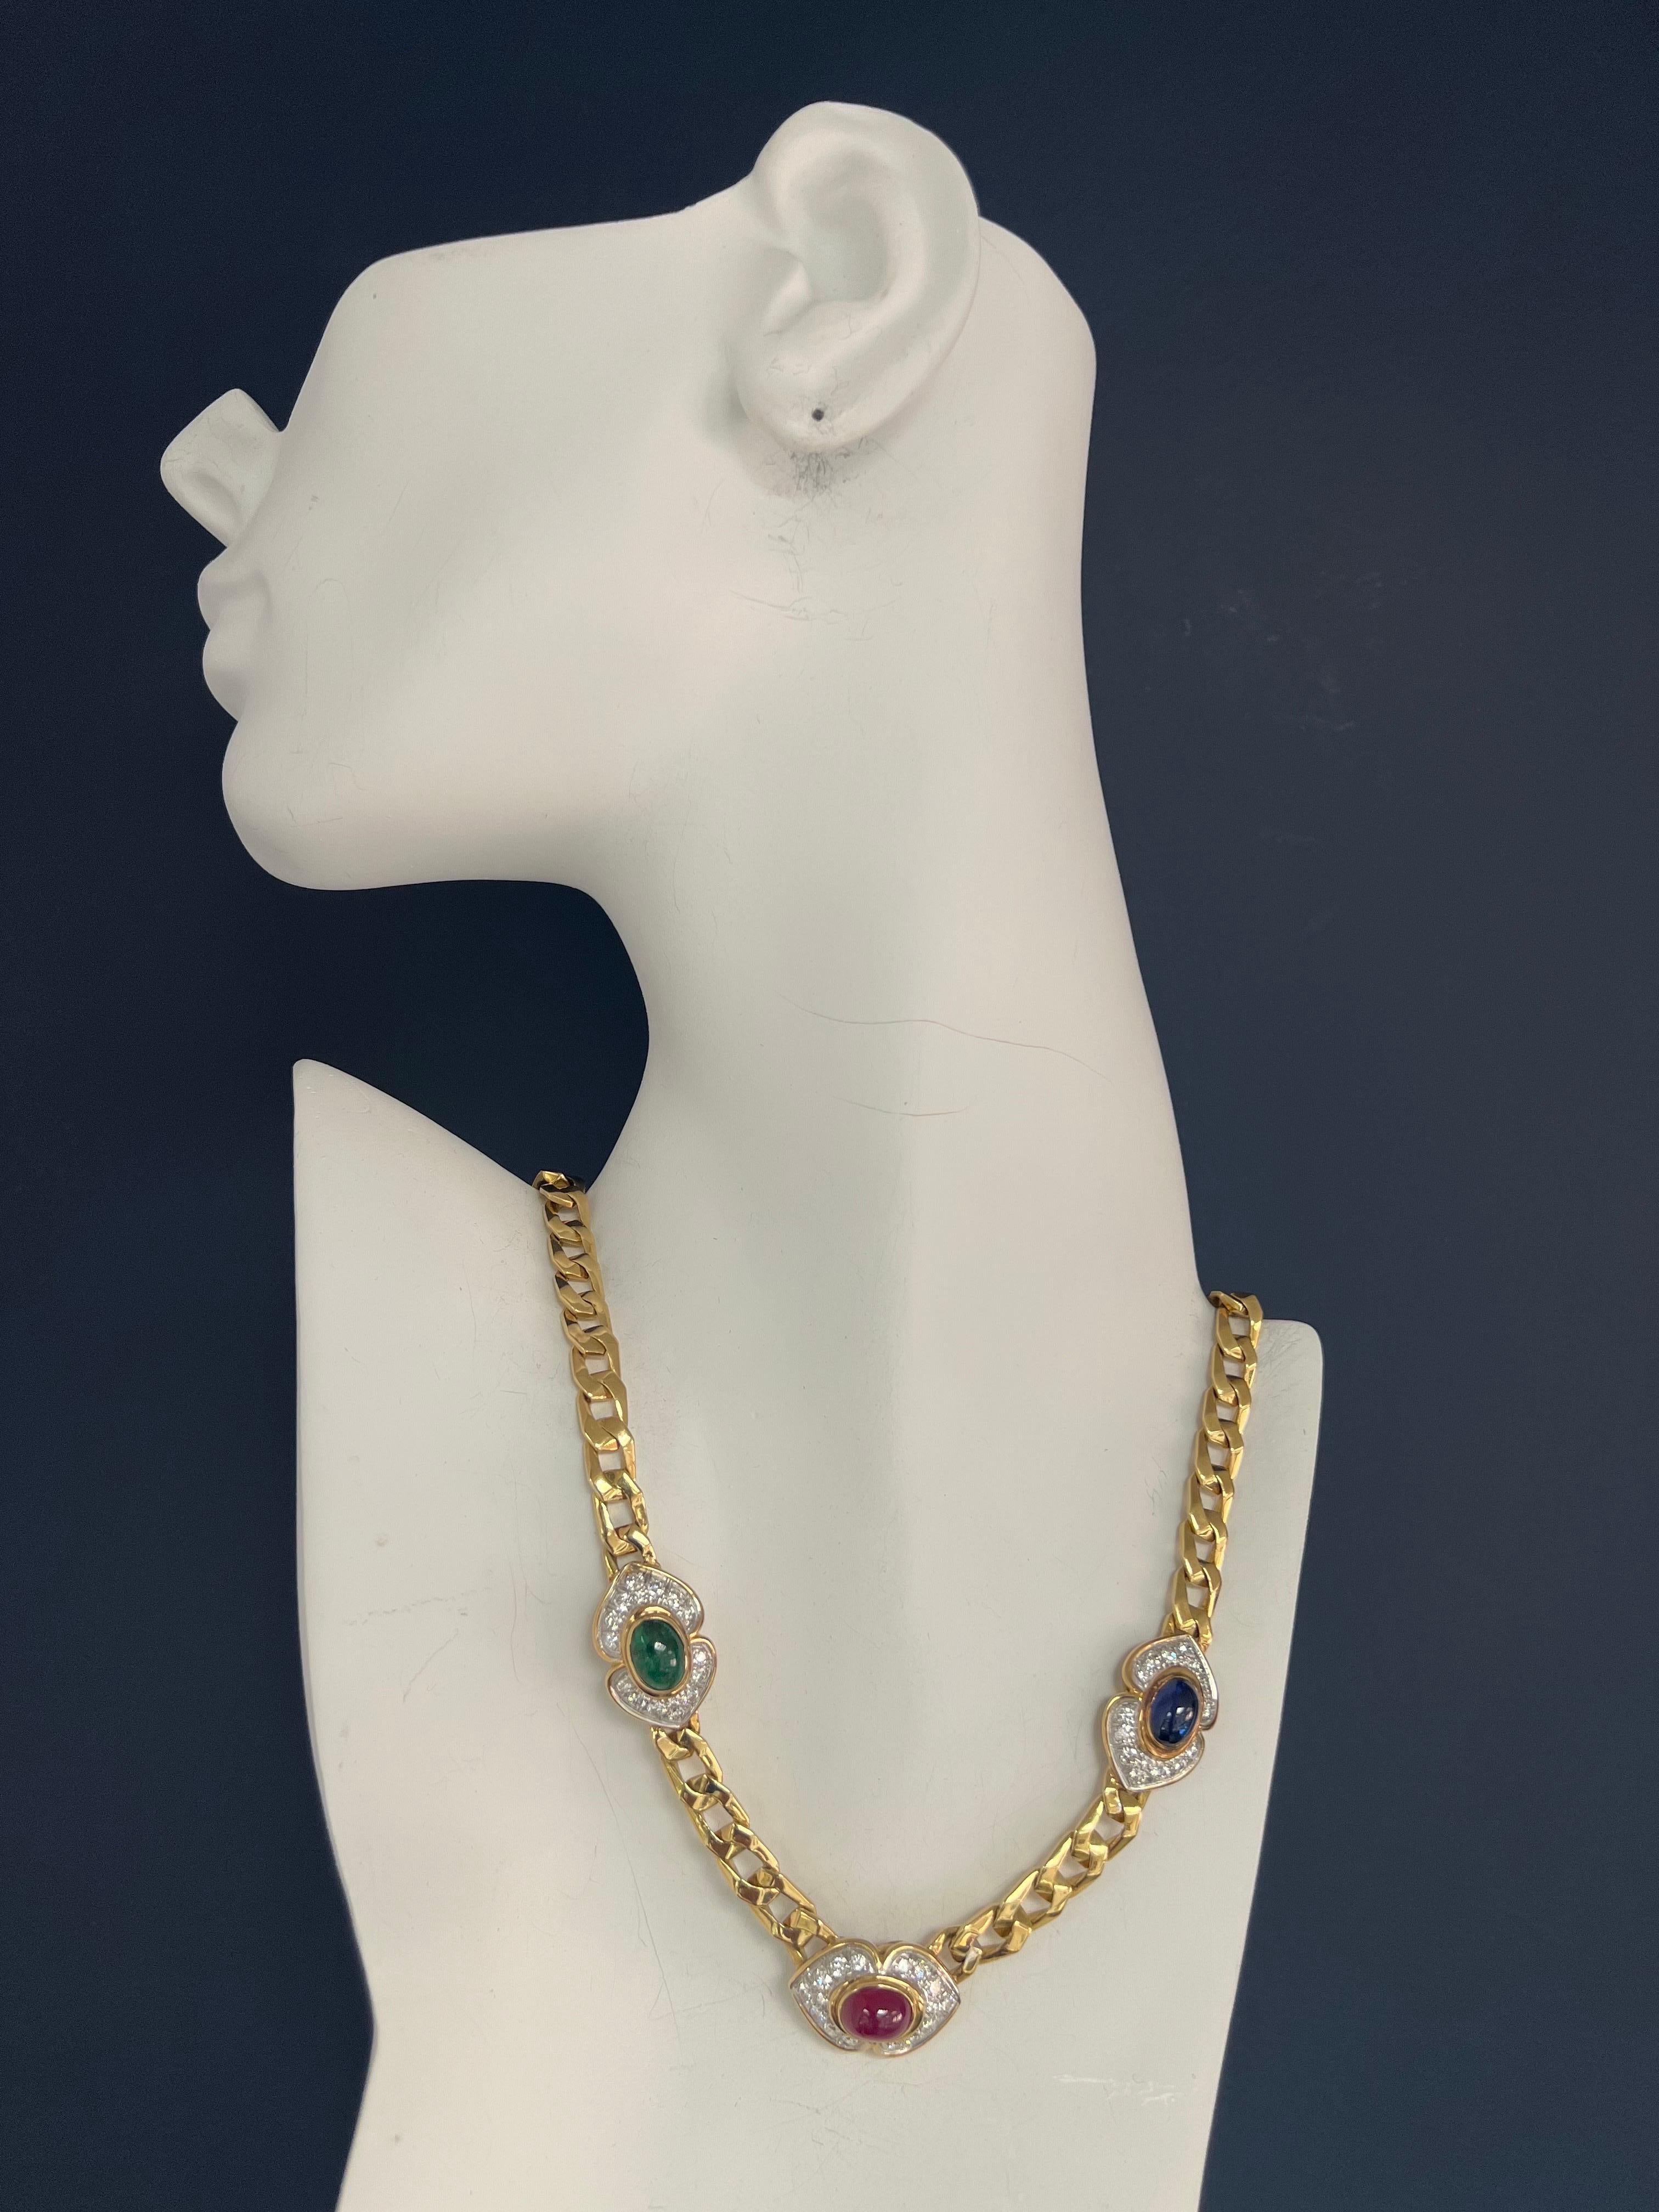 A Magnificent 14.50 Carat Natural Colorless Round Brilliant Diamond, Ruby, Sapphire and Emerald Cabochon necklace set in 18k Yellow Gold. 

The piece is set with 48 colorless Round Brilliant diamonds weighing a total of 4.20 Carats, VS in clarity.